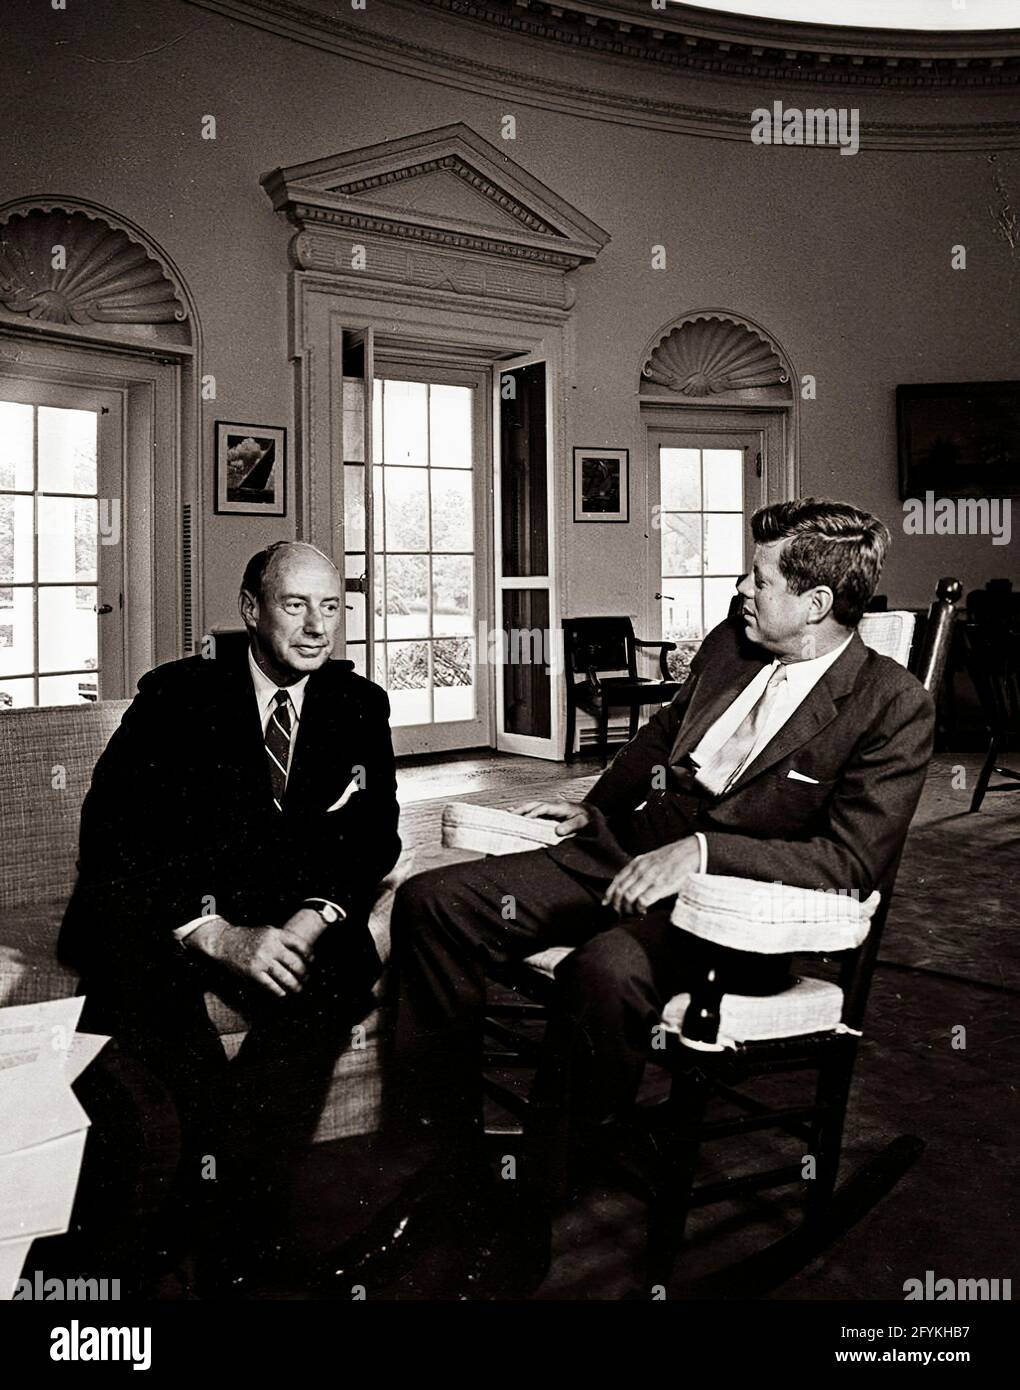 3 August 1961 President John F. Kennedy (in rocking chair) meets with United States Ambassador to the United Nations Adlai E. Stevenson in the Oval Office, White House, Washington, D.C.. Raised in Bloomington, Illinois, Stevenson was a member of the Democratic Party.[1] He served in numerous positions in the federal government during the 1930s and 1940s, including the Agricultural Adjustment Administration, Federal Alcohol Administration, Department of the Navy, and the State Department. In 1945, he served on the committee that created the United Nations. Stock Photo